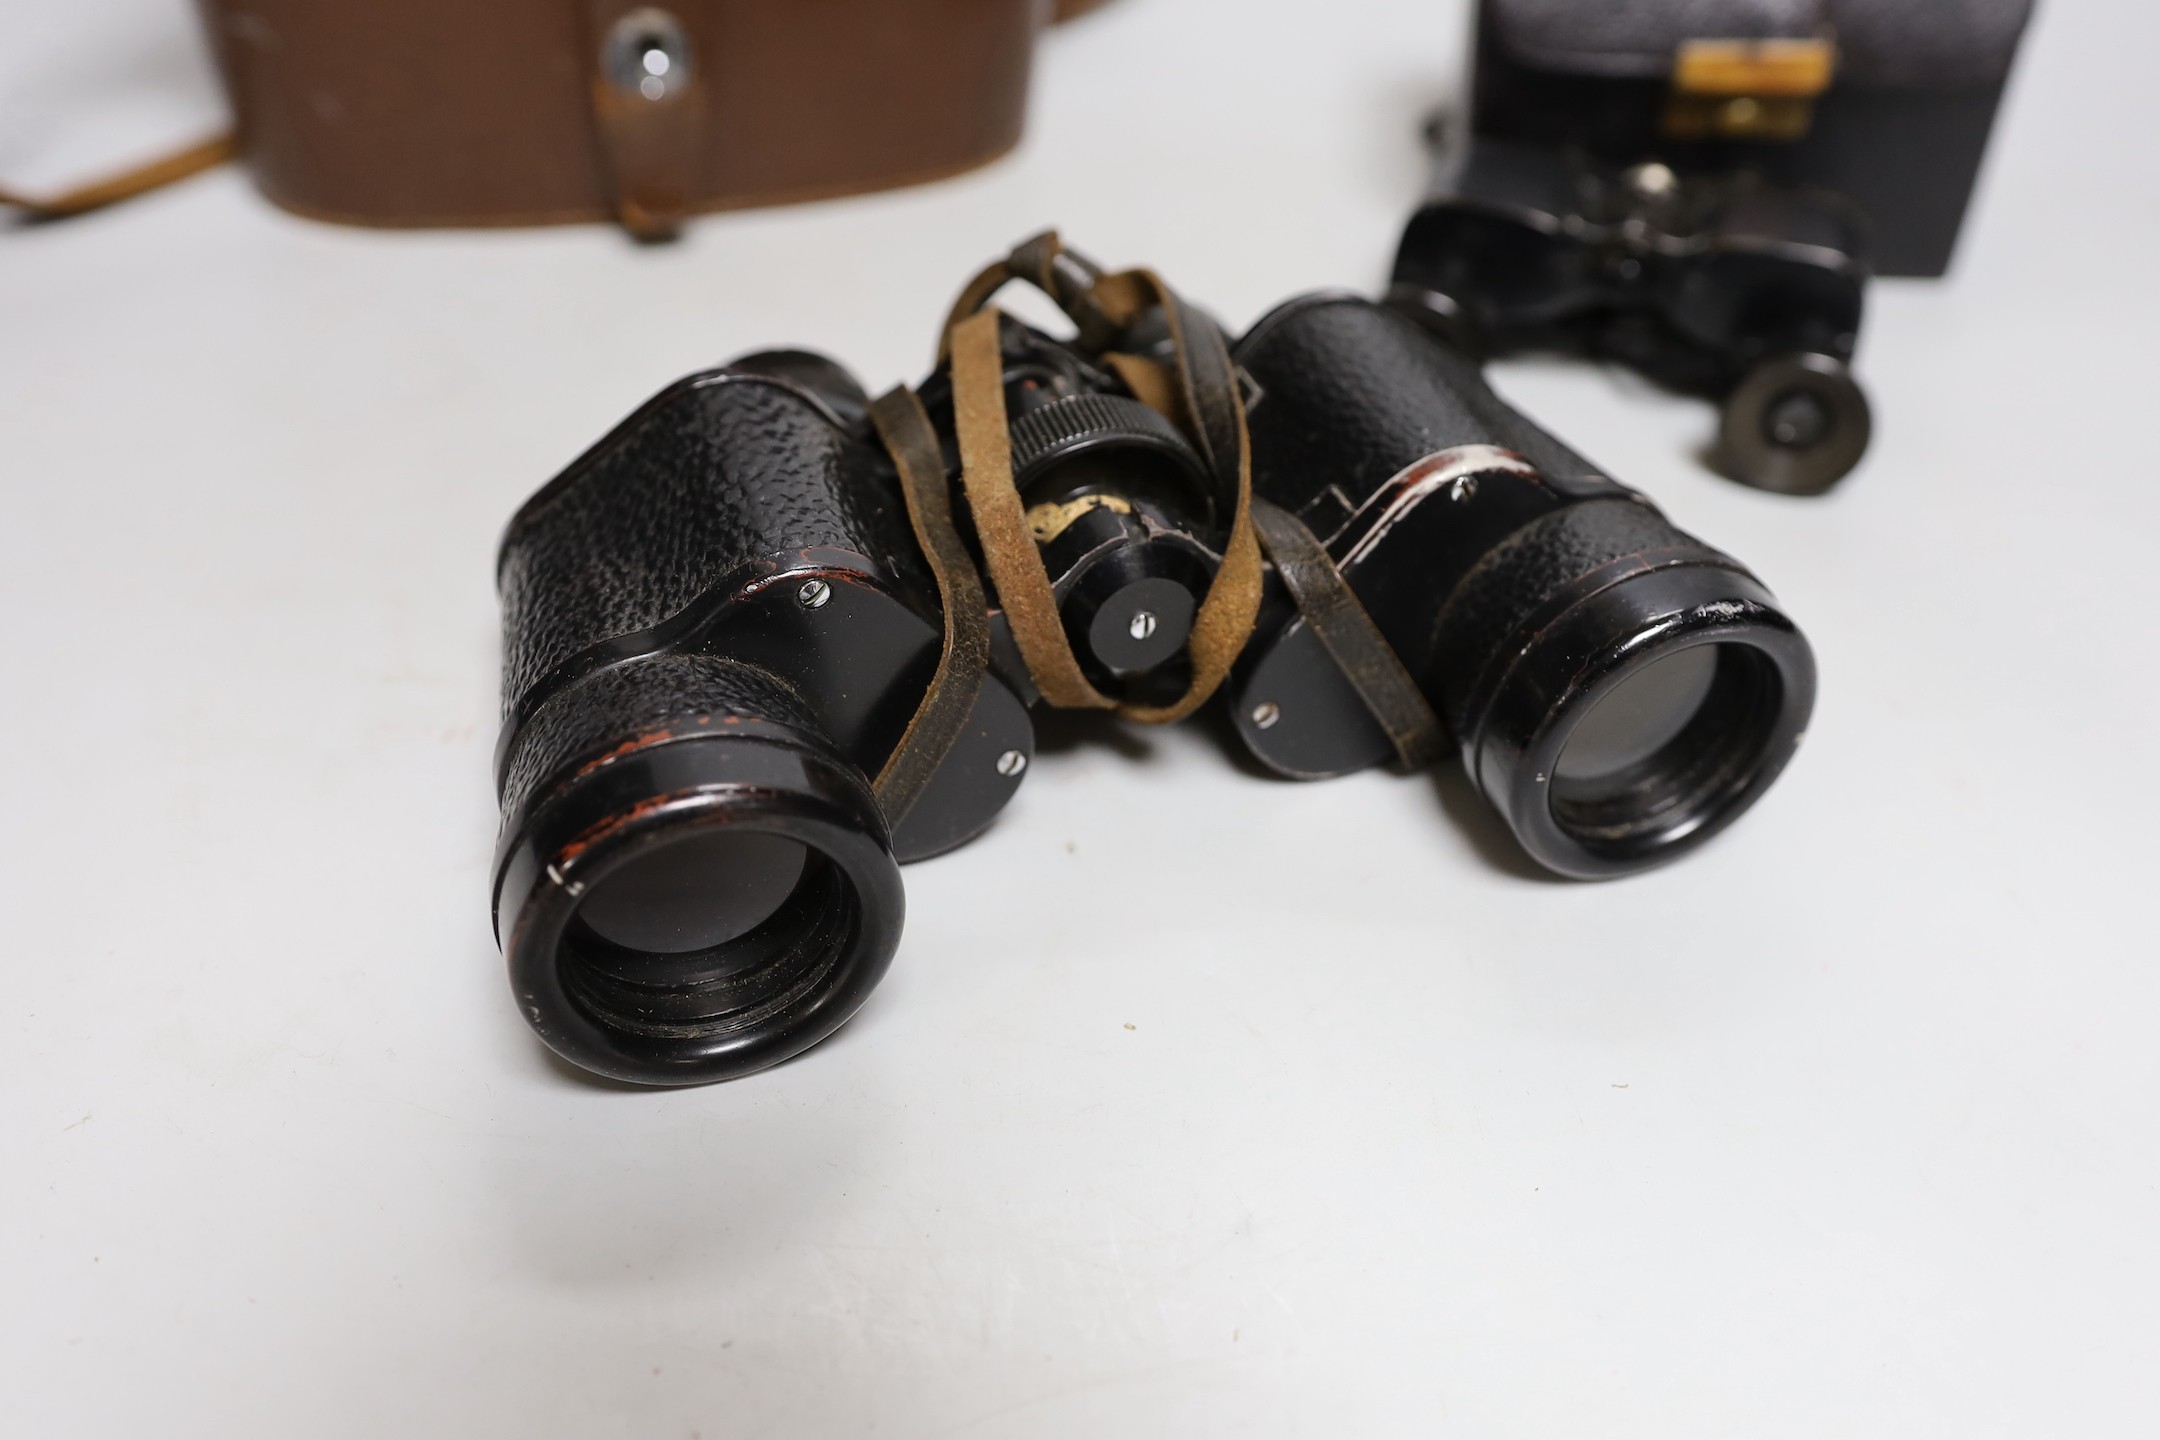 A cased set of Ross binoculars and a smaller cased set for racing